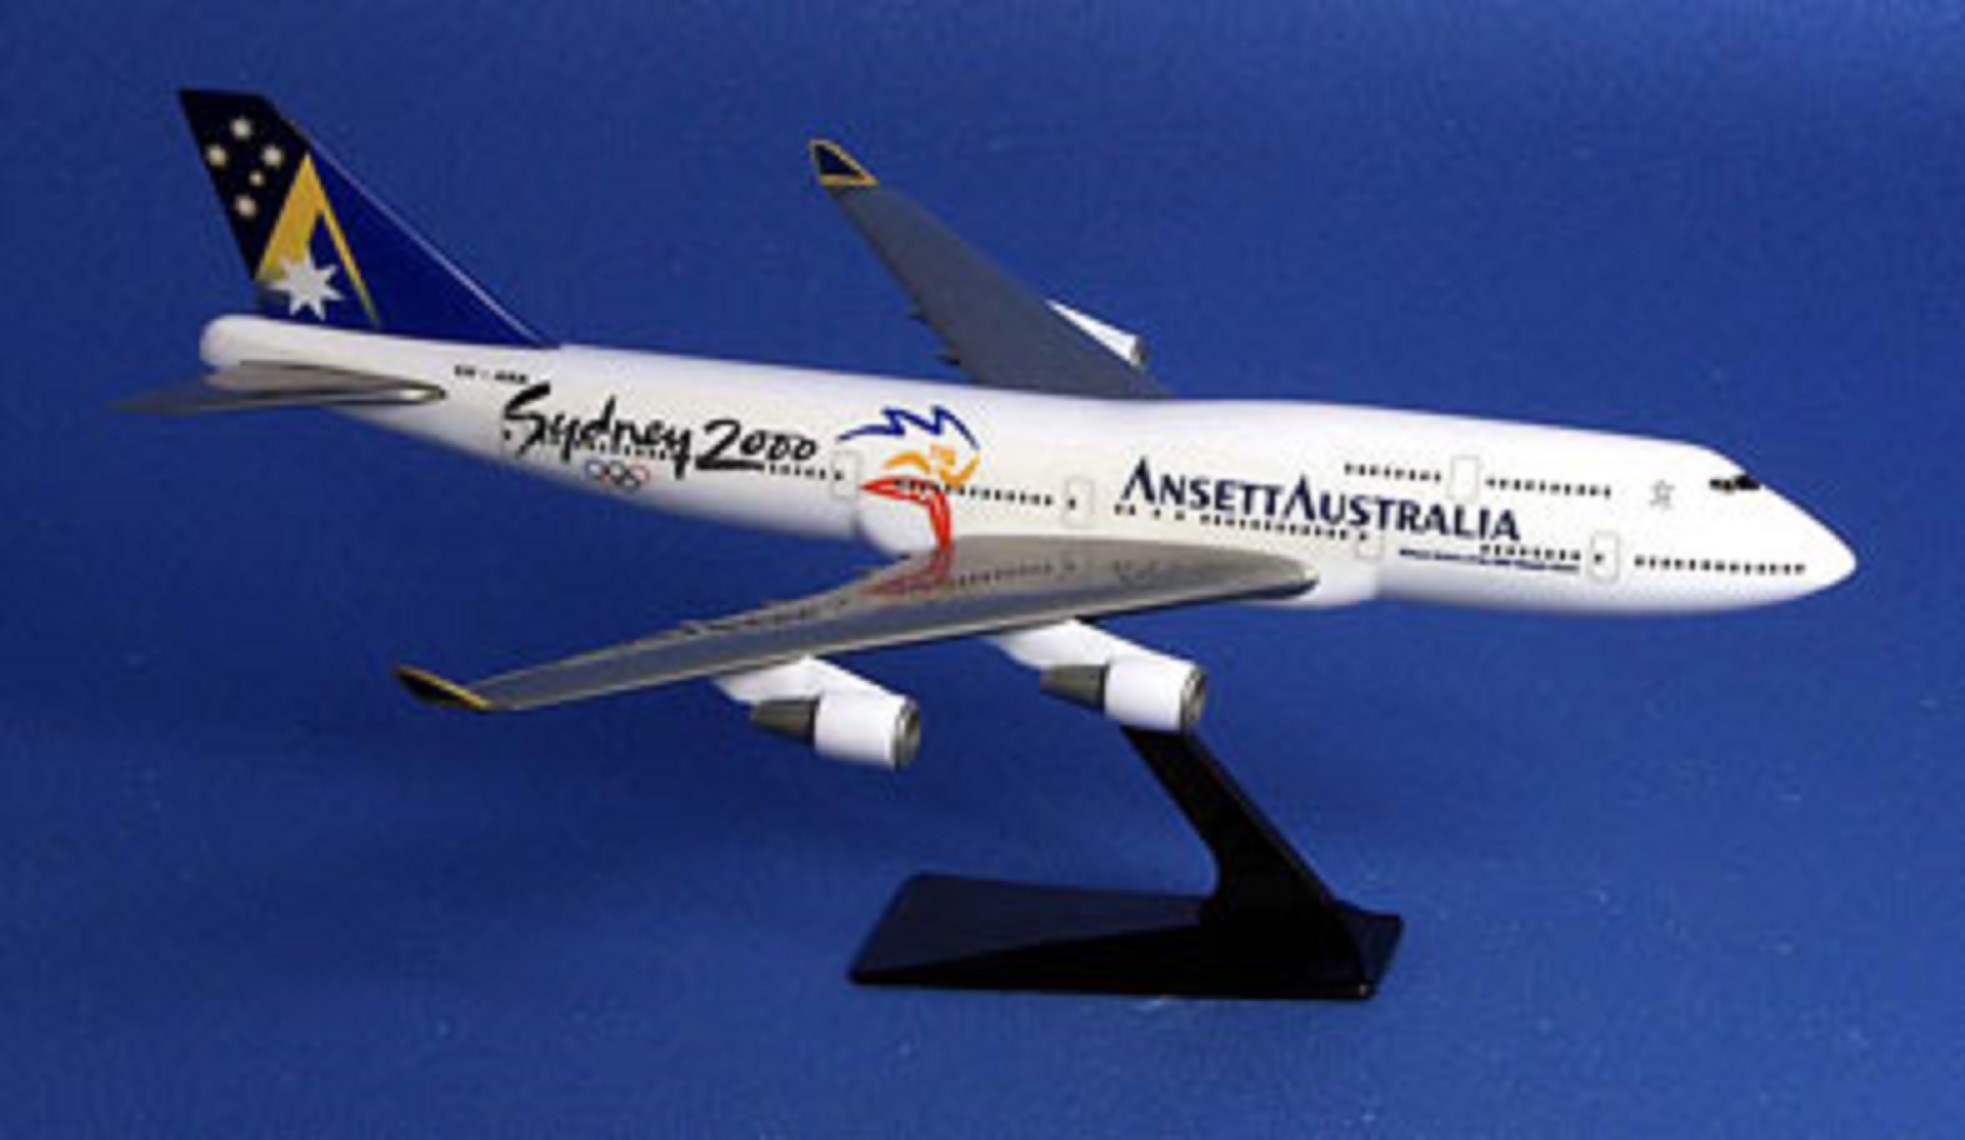 BOEING B747-400 (Olympic Limited Edition)